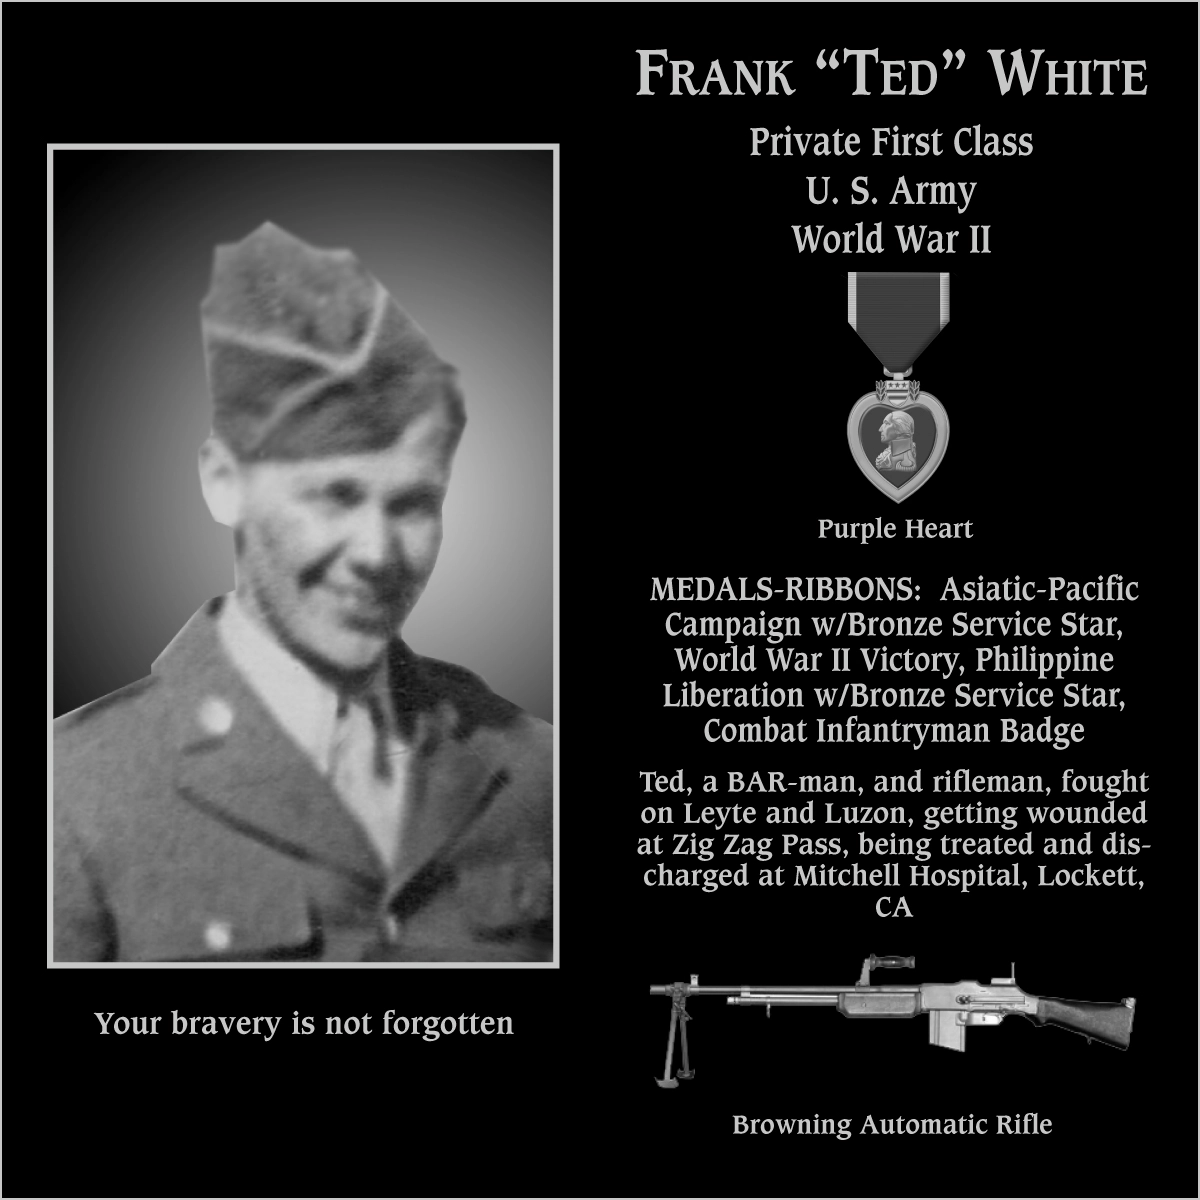 Frank “Ted” White